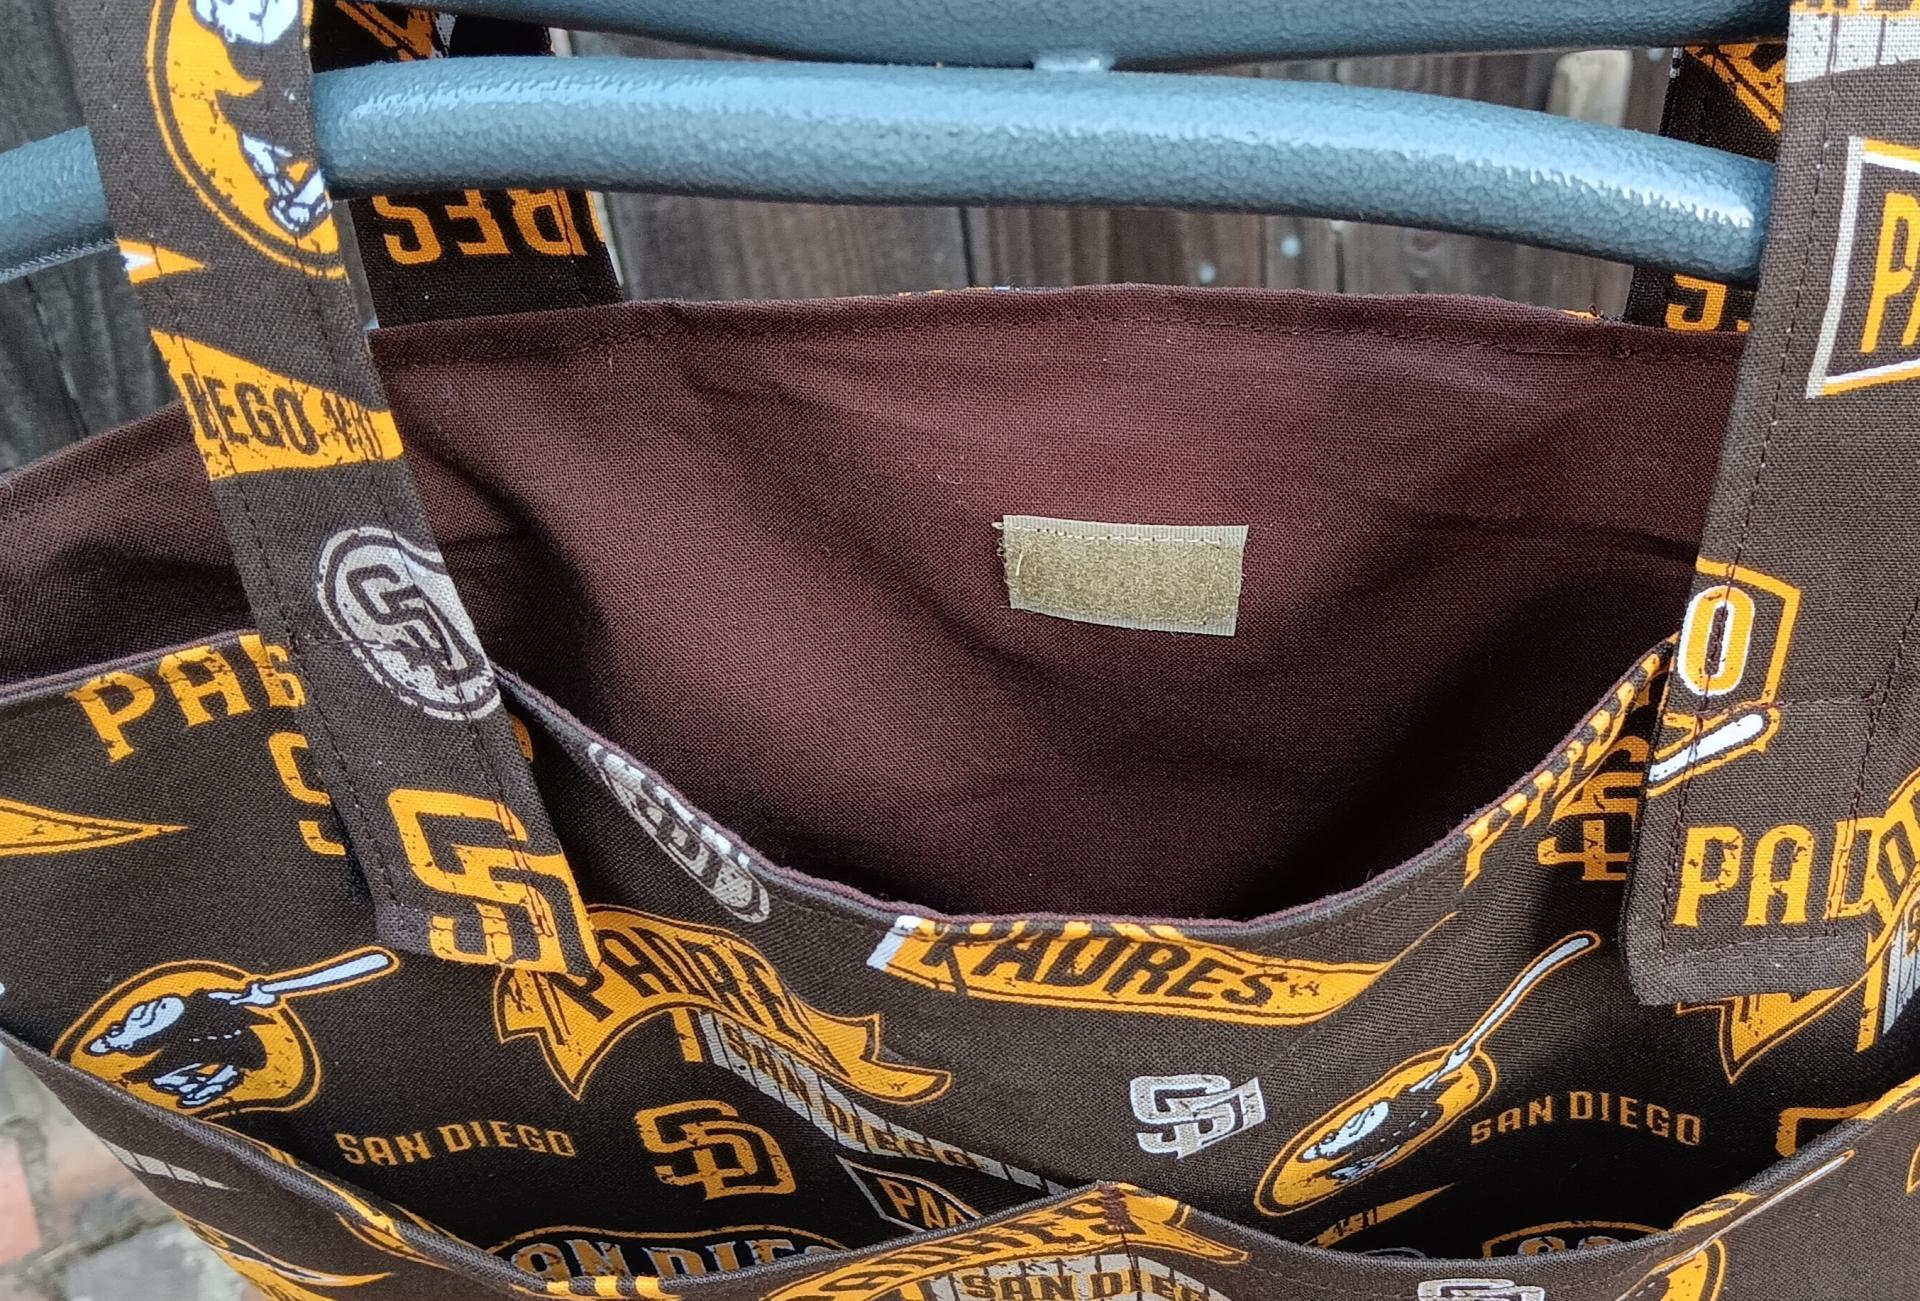 Walker bag with pockets, caddy, pouch, hanging bag, handmade from San Diego Padres licensed fabric